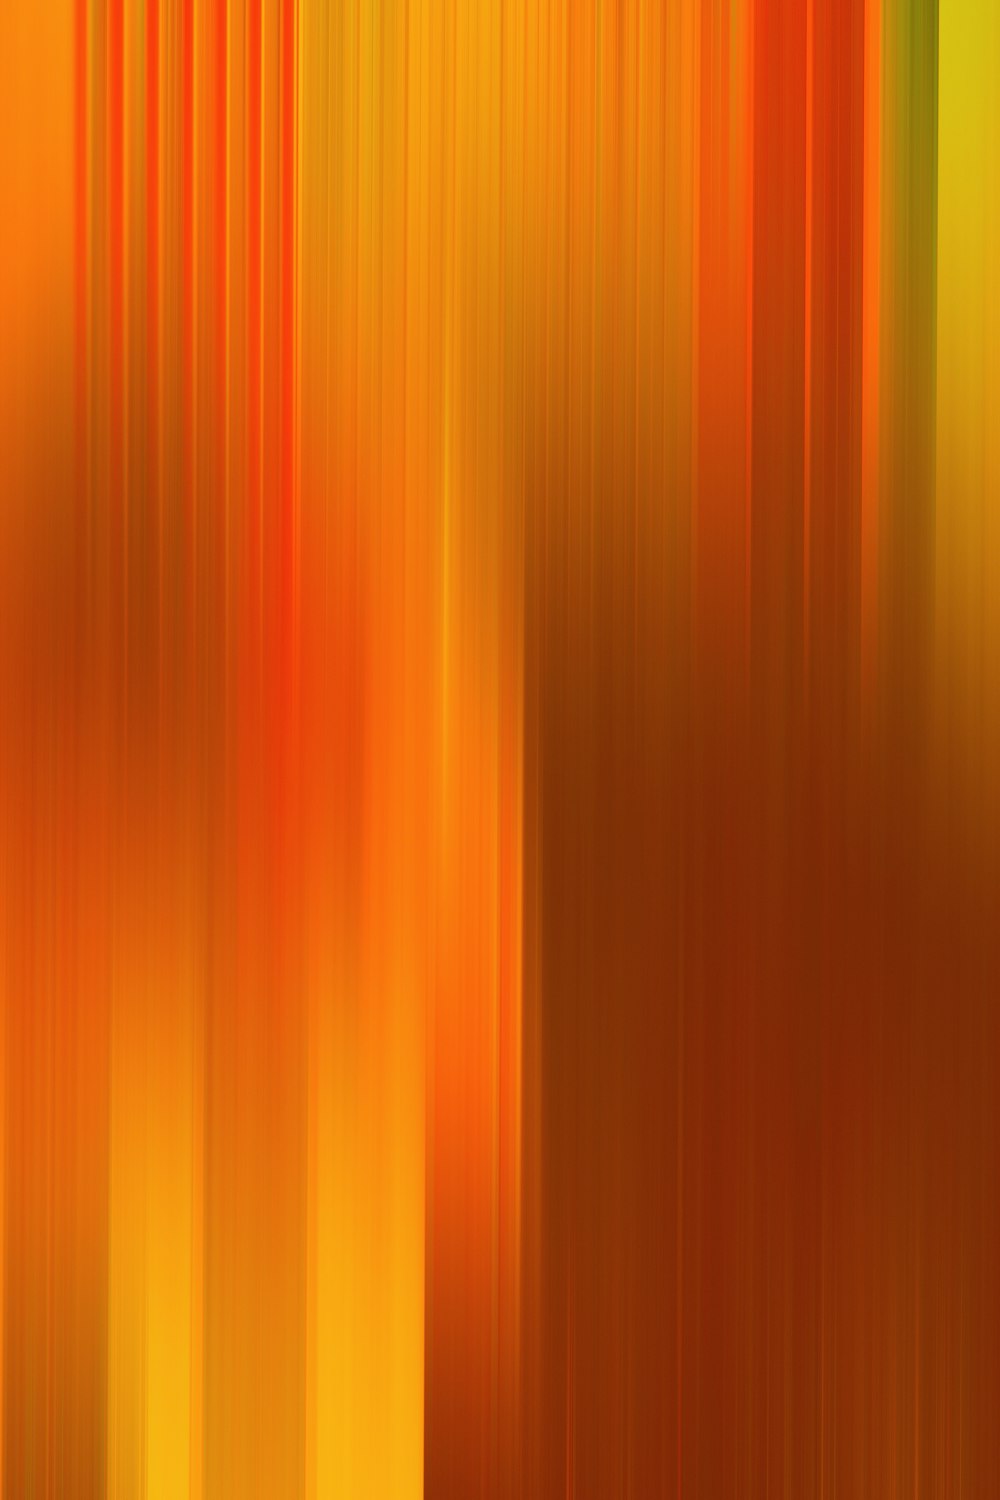 a blurry image of orange and yellow stripes